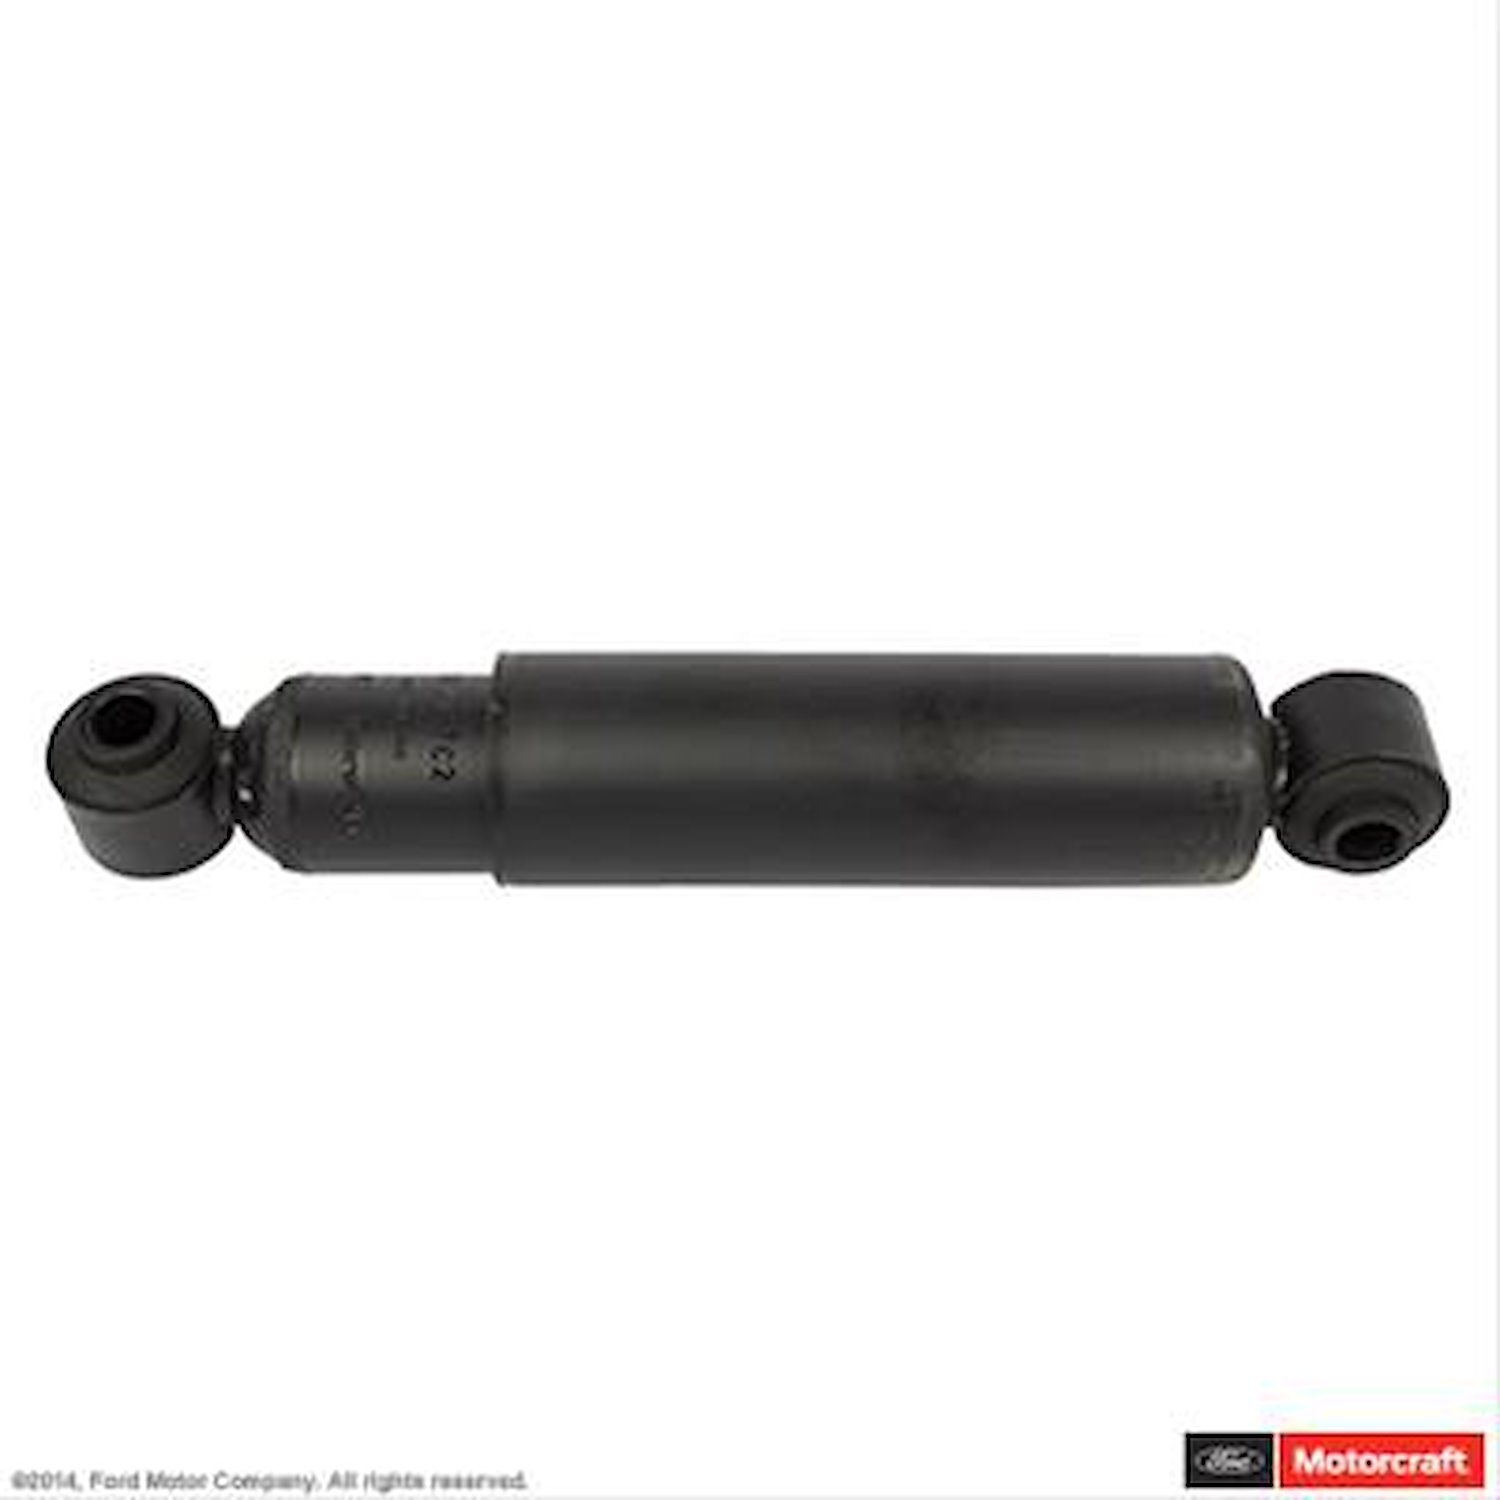 Shock Absorber Assembly for 2000-2015 Ford F-650, F-750